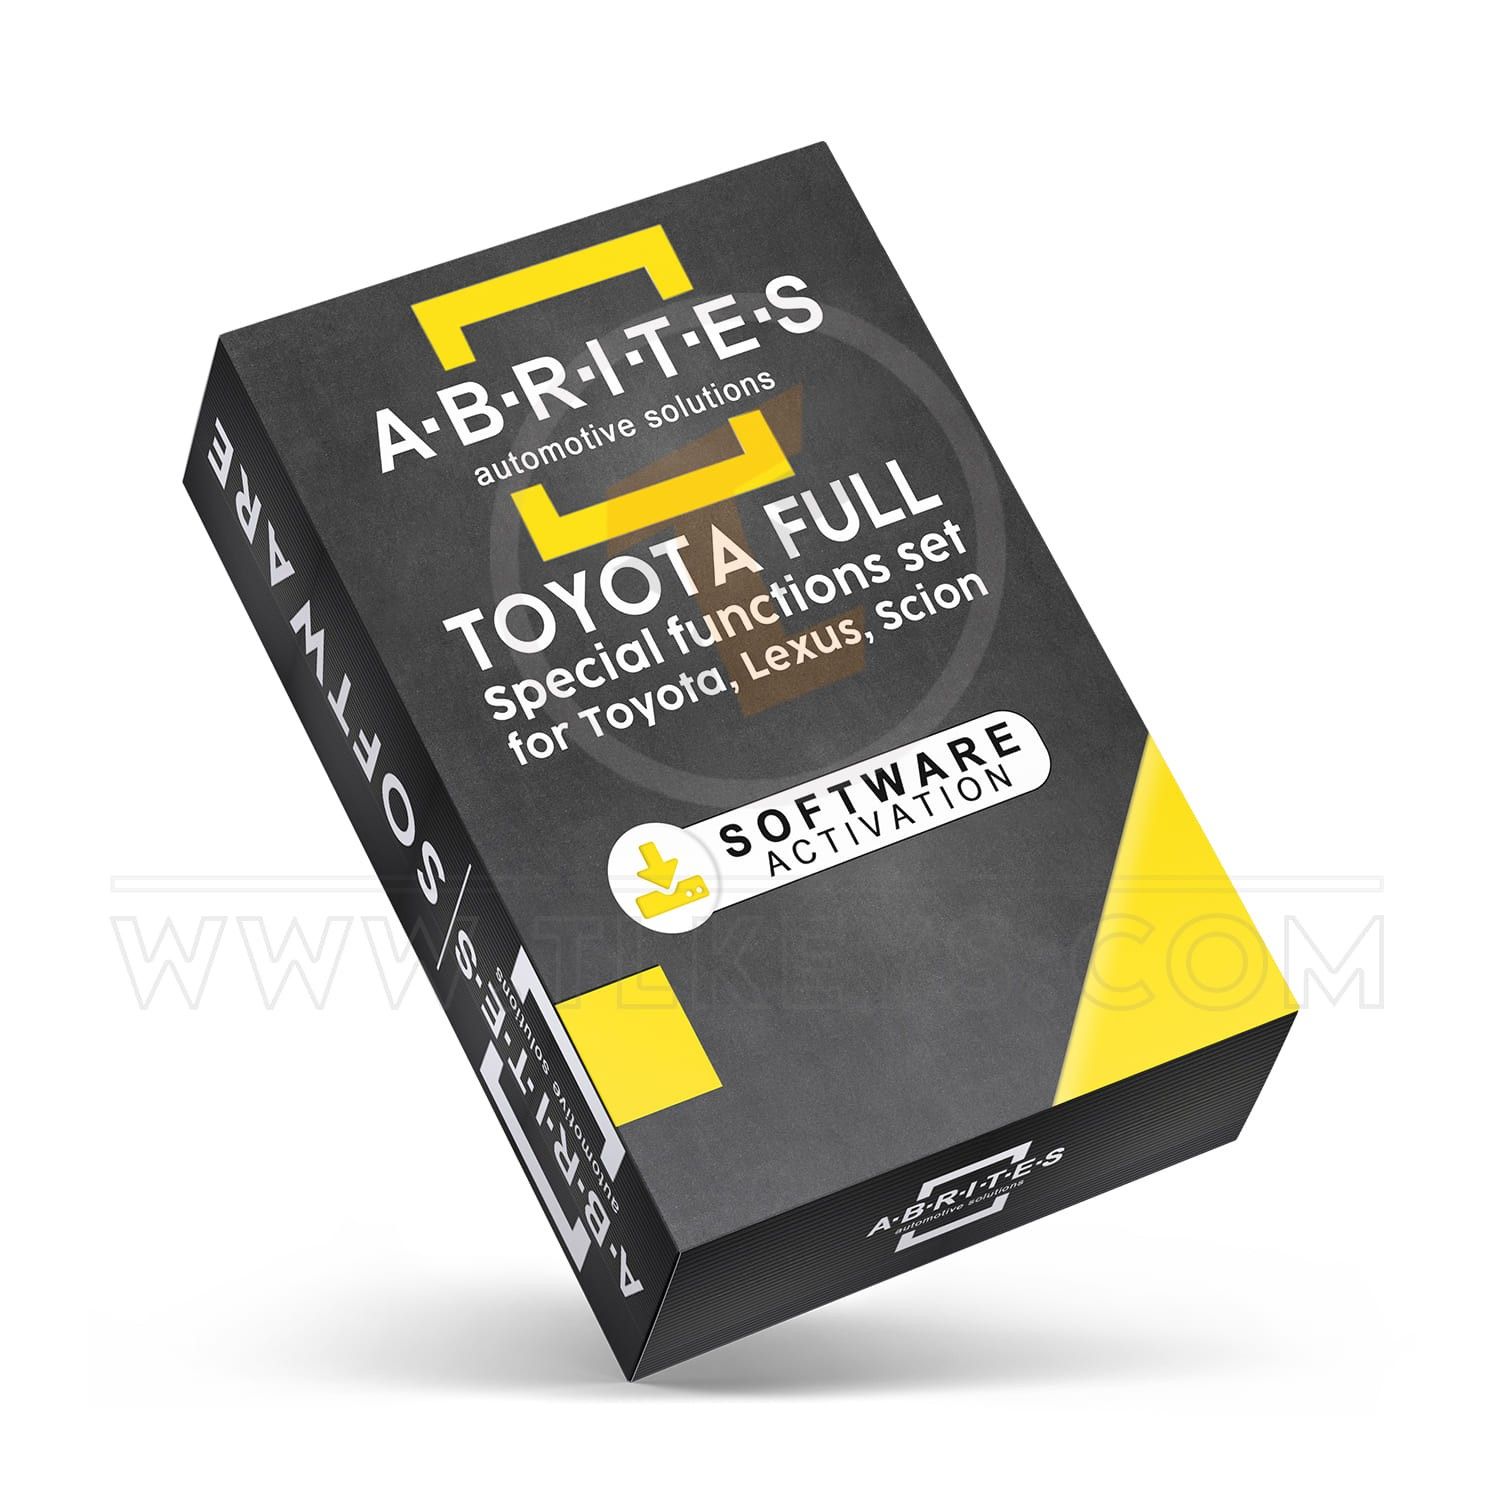 TOYOTA FULL ABRITES Special functions set software